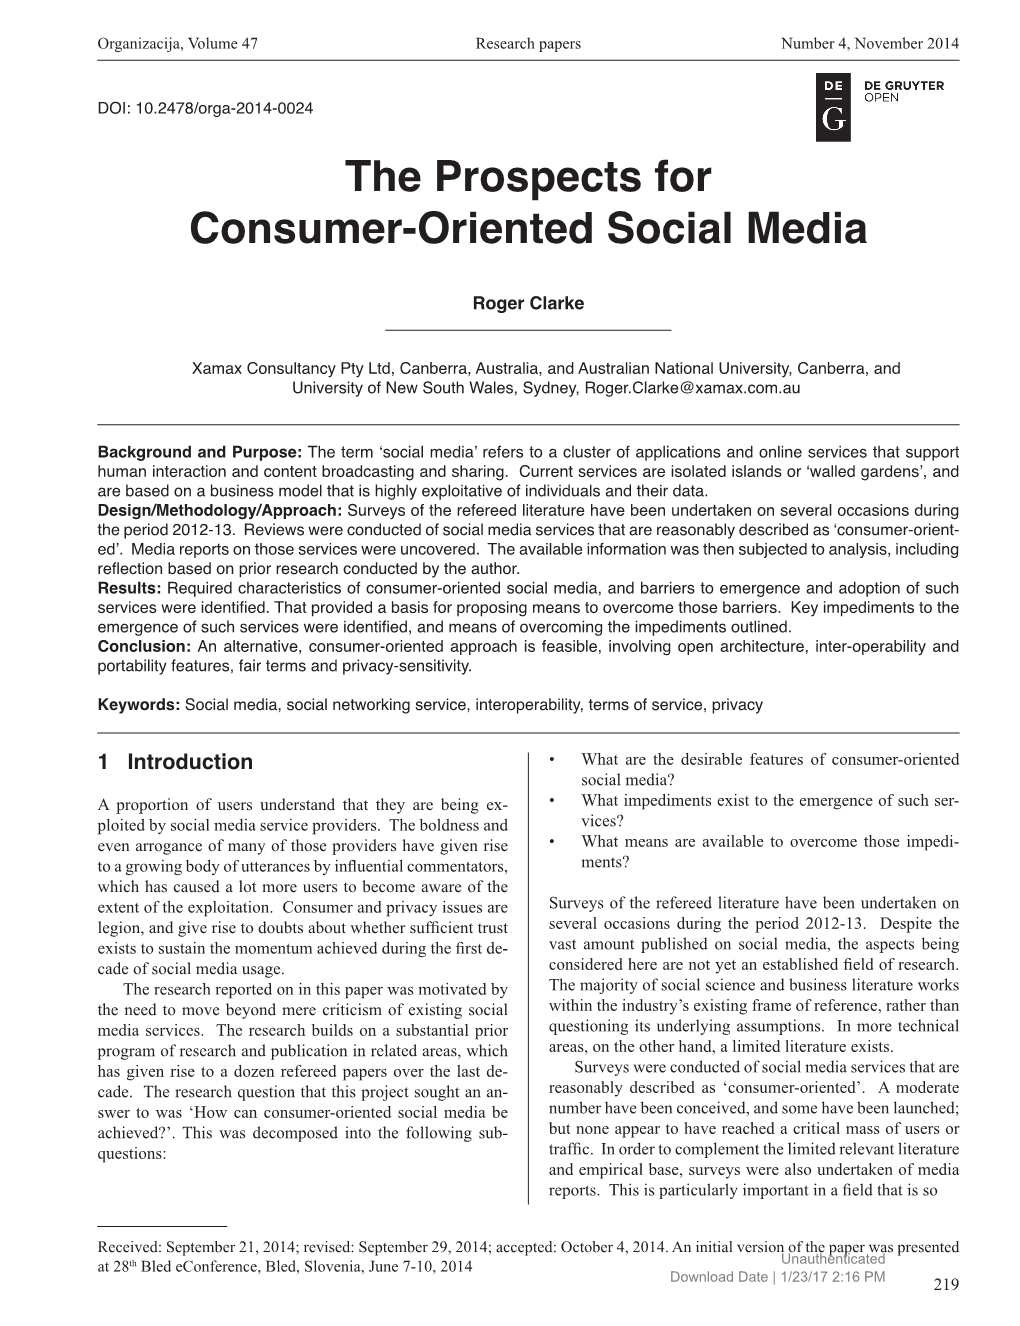 The Prospects for Consumer-Oriented Social Media